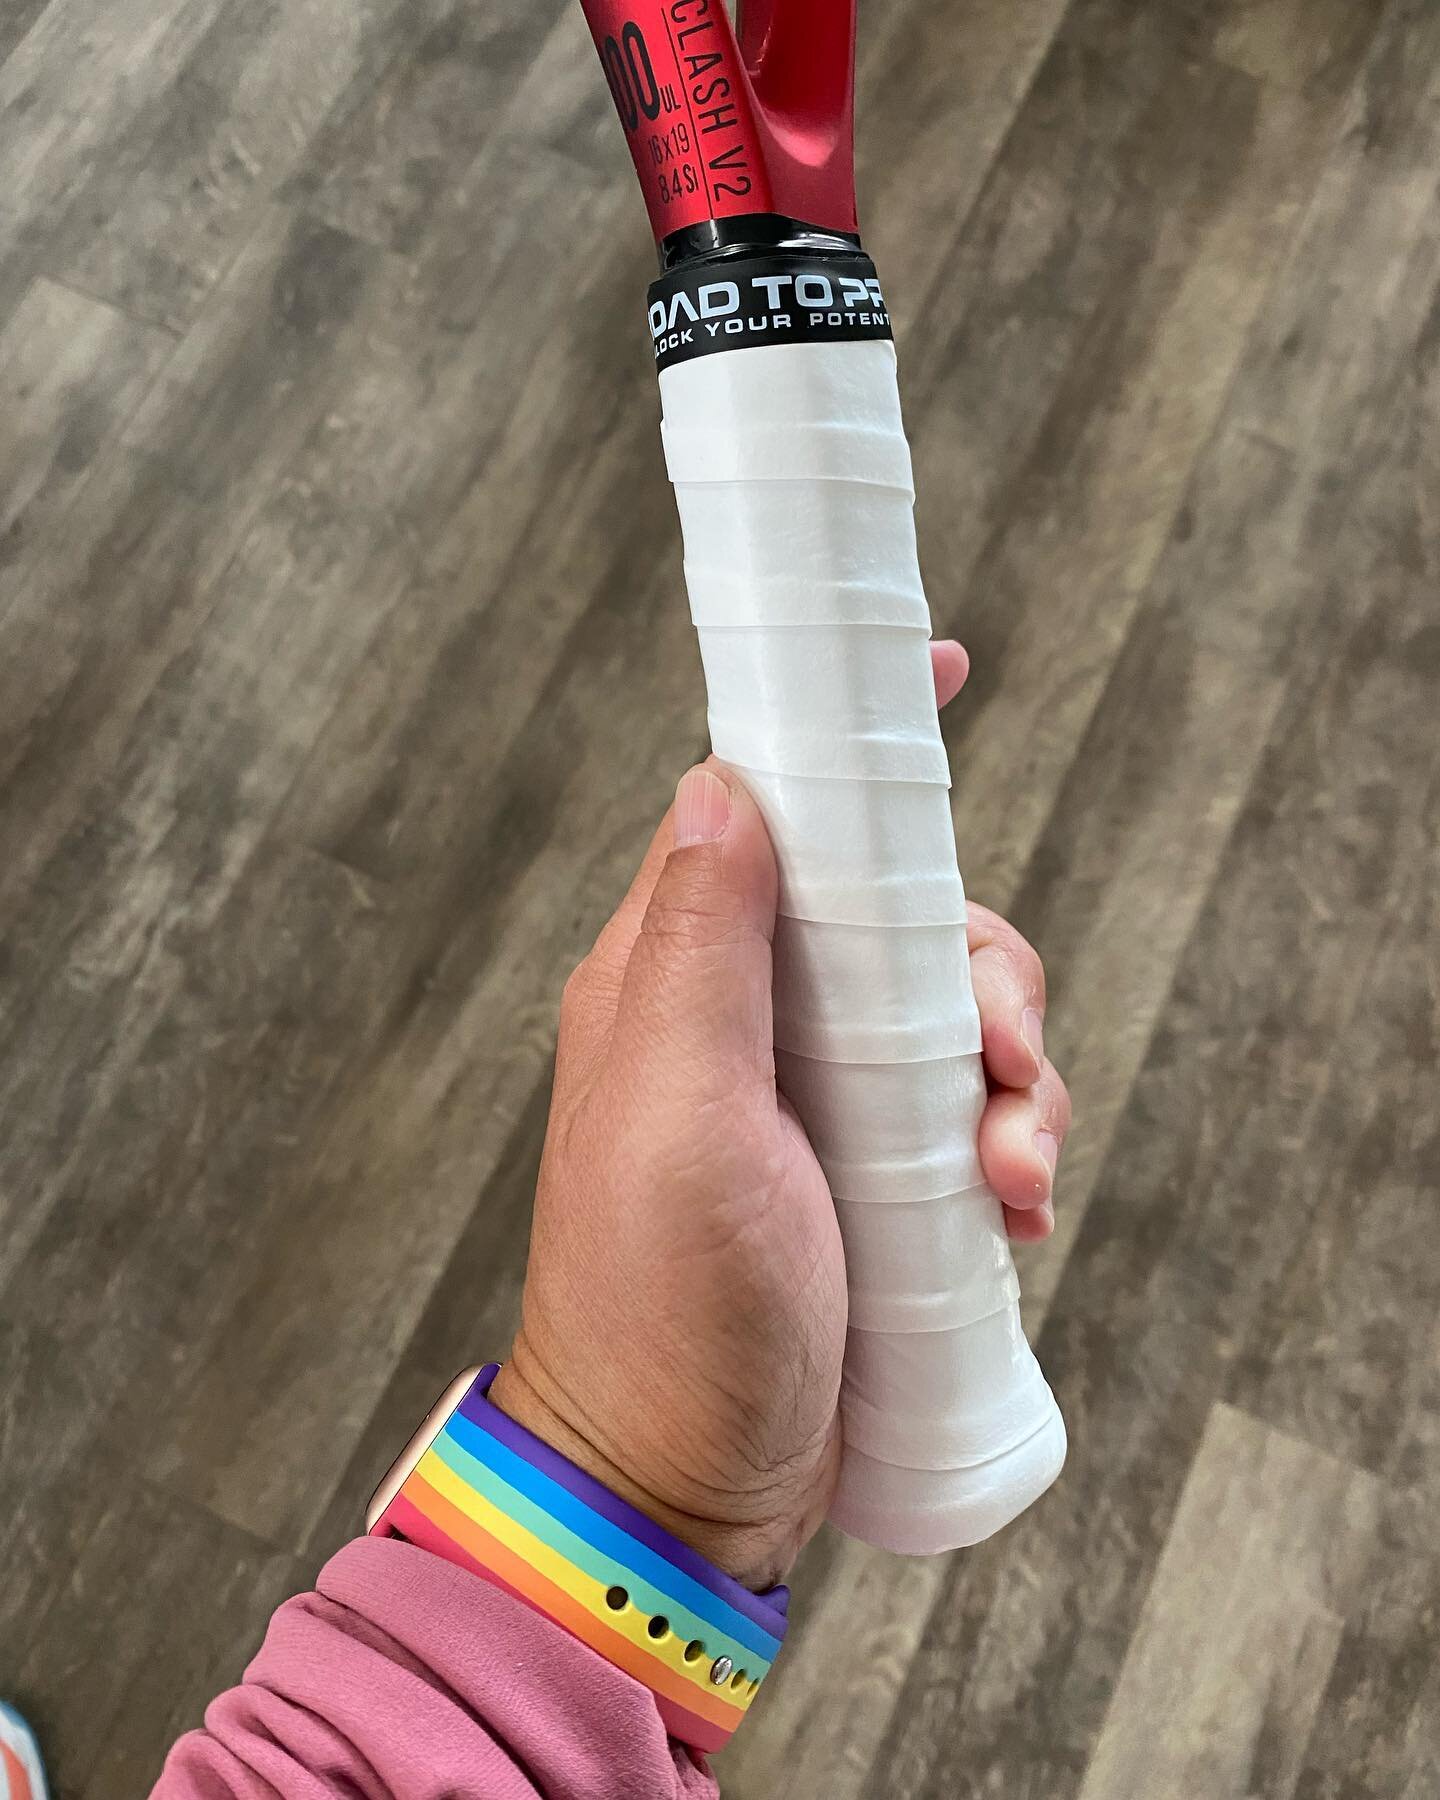 GIVEAWAY TIME!
I just love a fresh overgrip! Who needs a replacement? I have 9 3packs to give away, courtesy of @rtptennis!  Comment below with your favorite thanksgiving food, and I&rsquo;ll choose the winners on Wednesday!
*must pick up at the club